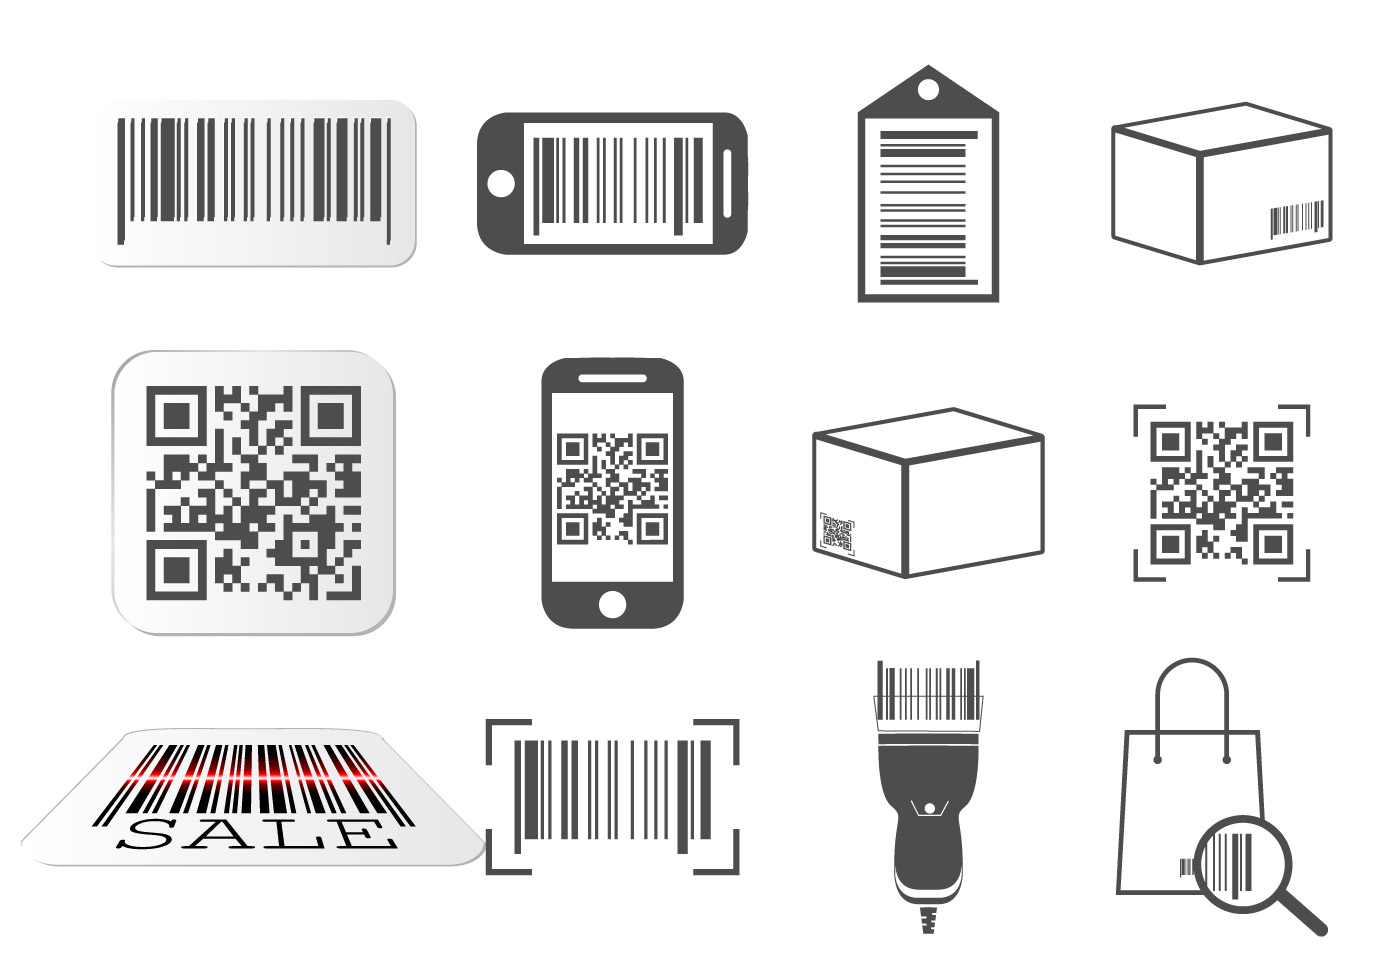 Download QR code and Barcode icons set 115161 - Download Free ...